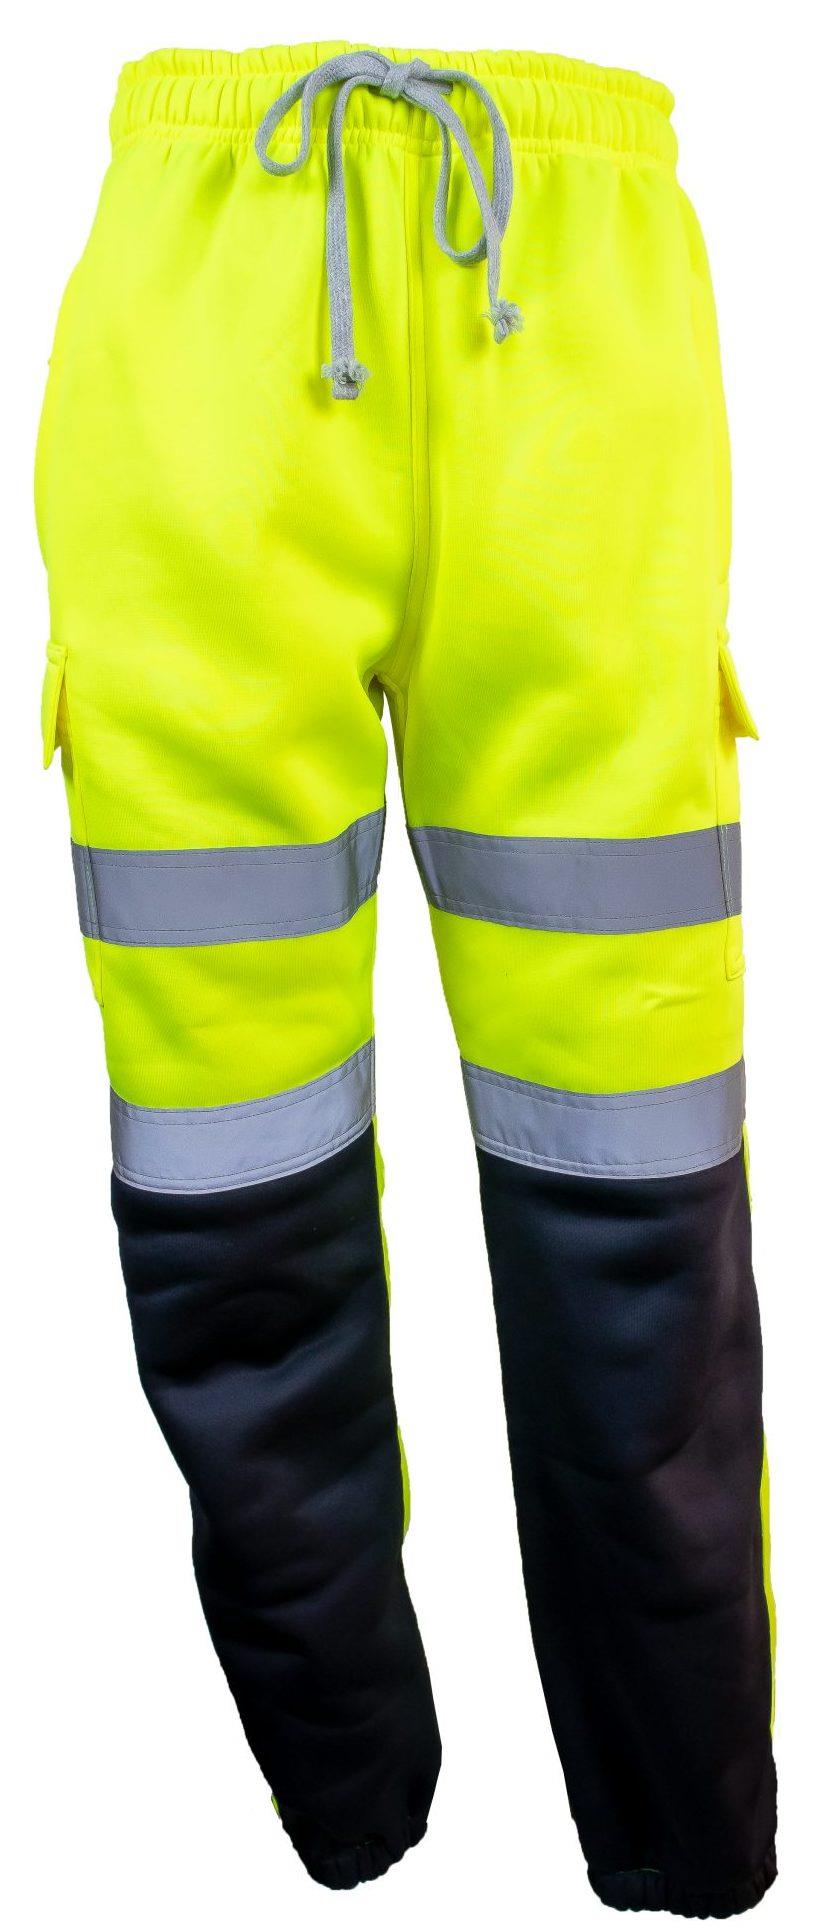 Unbreakable Gibson high-visibility yellow/navy Traffic jogger #U303